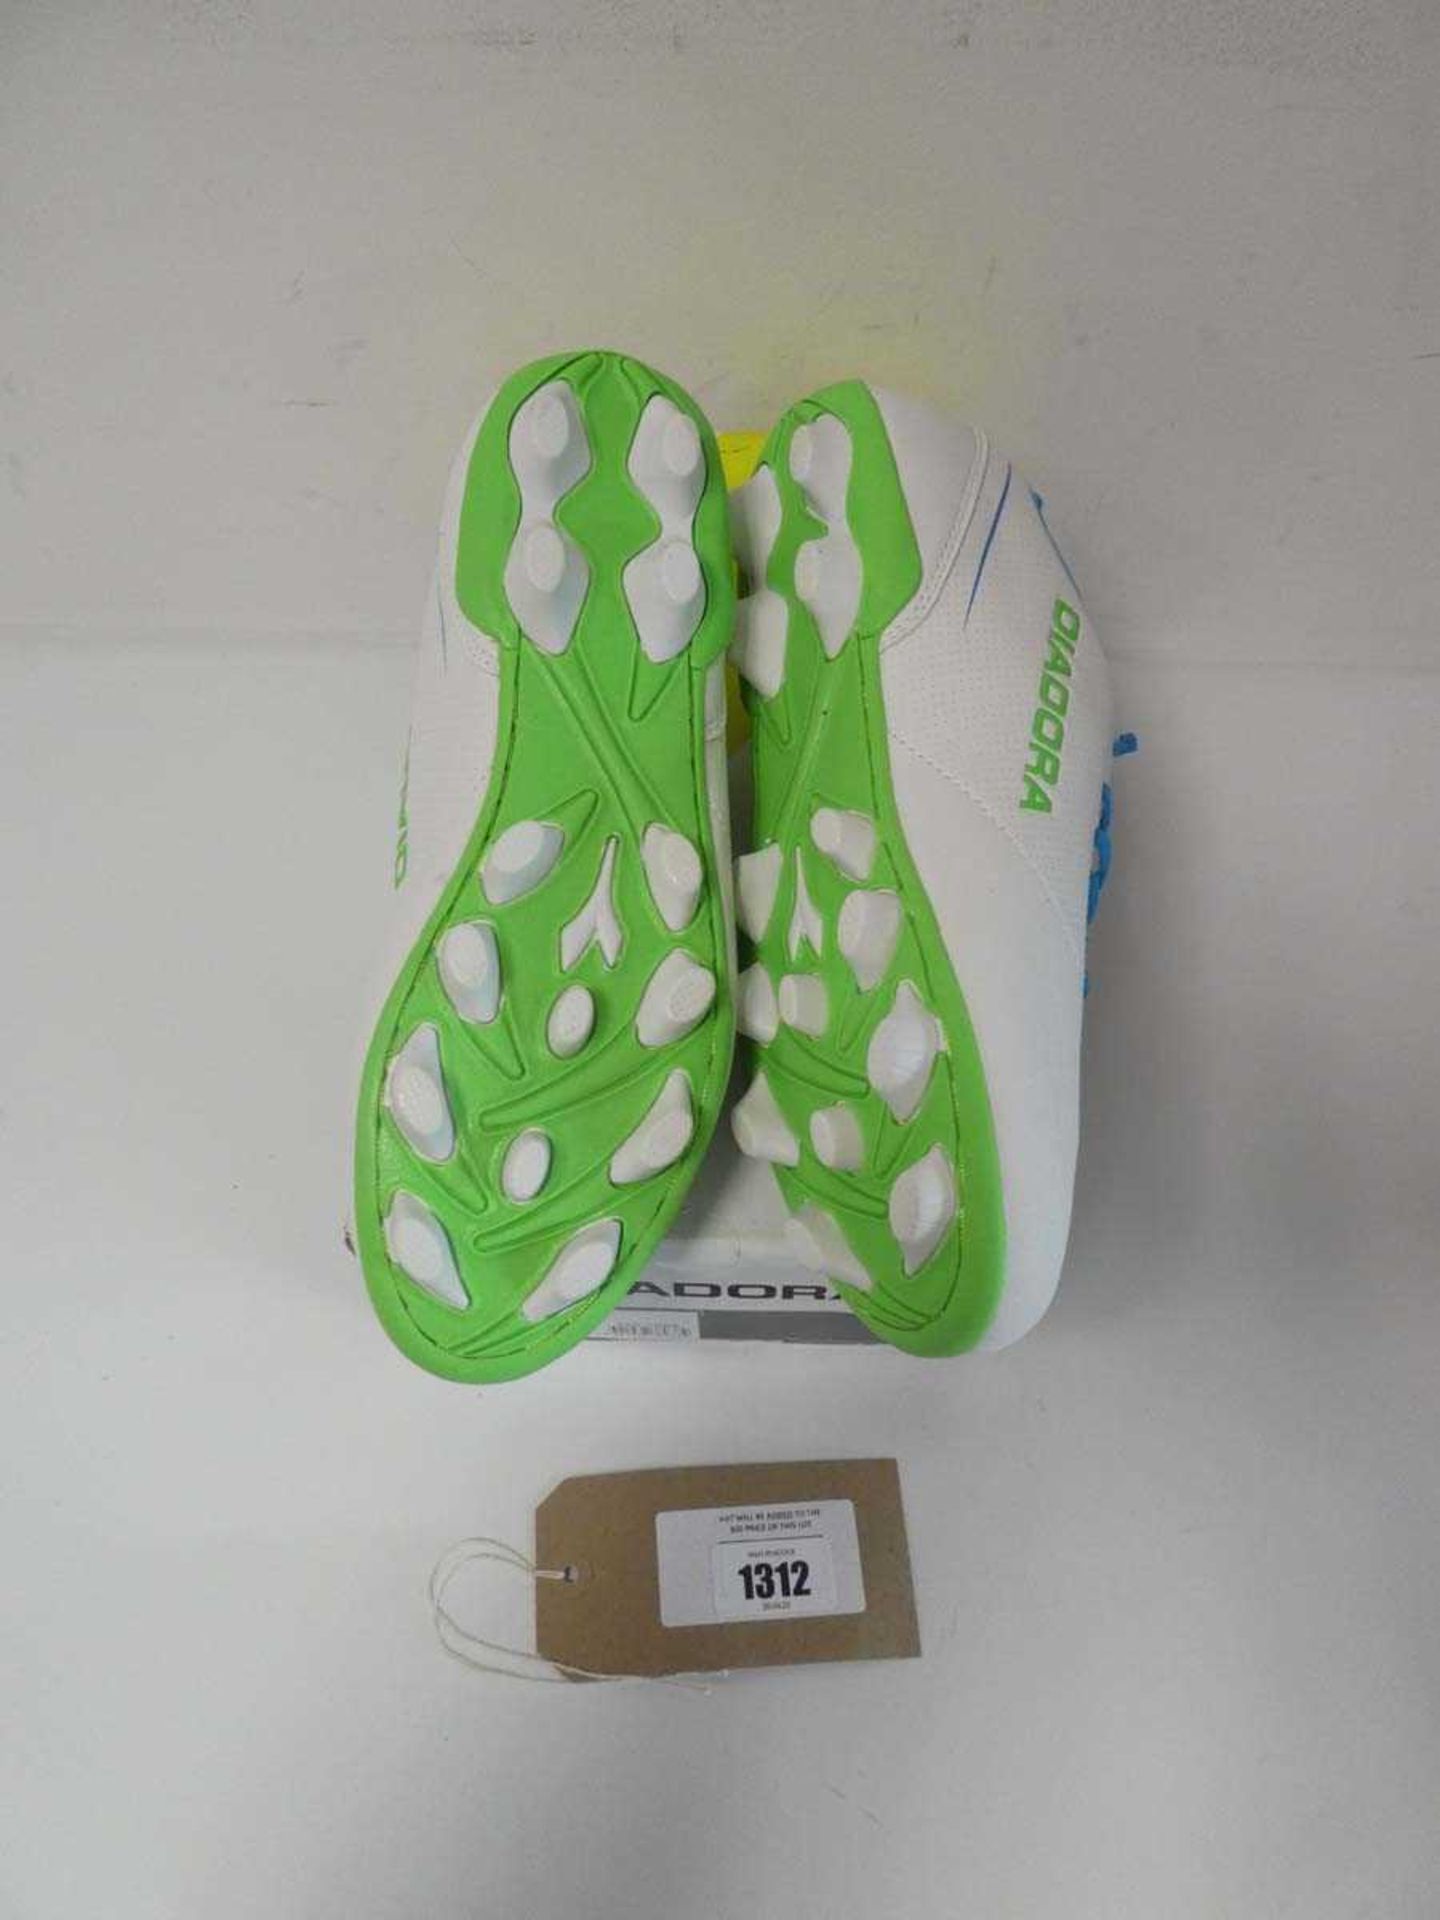 +VAT Diadora shoes in white/green size UK9 (boxed) - Image 4 of 4